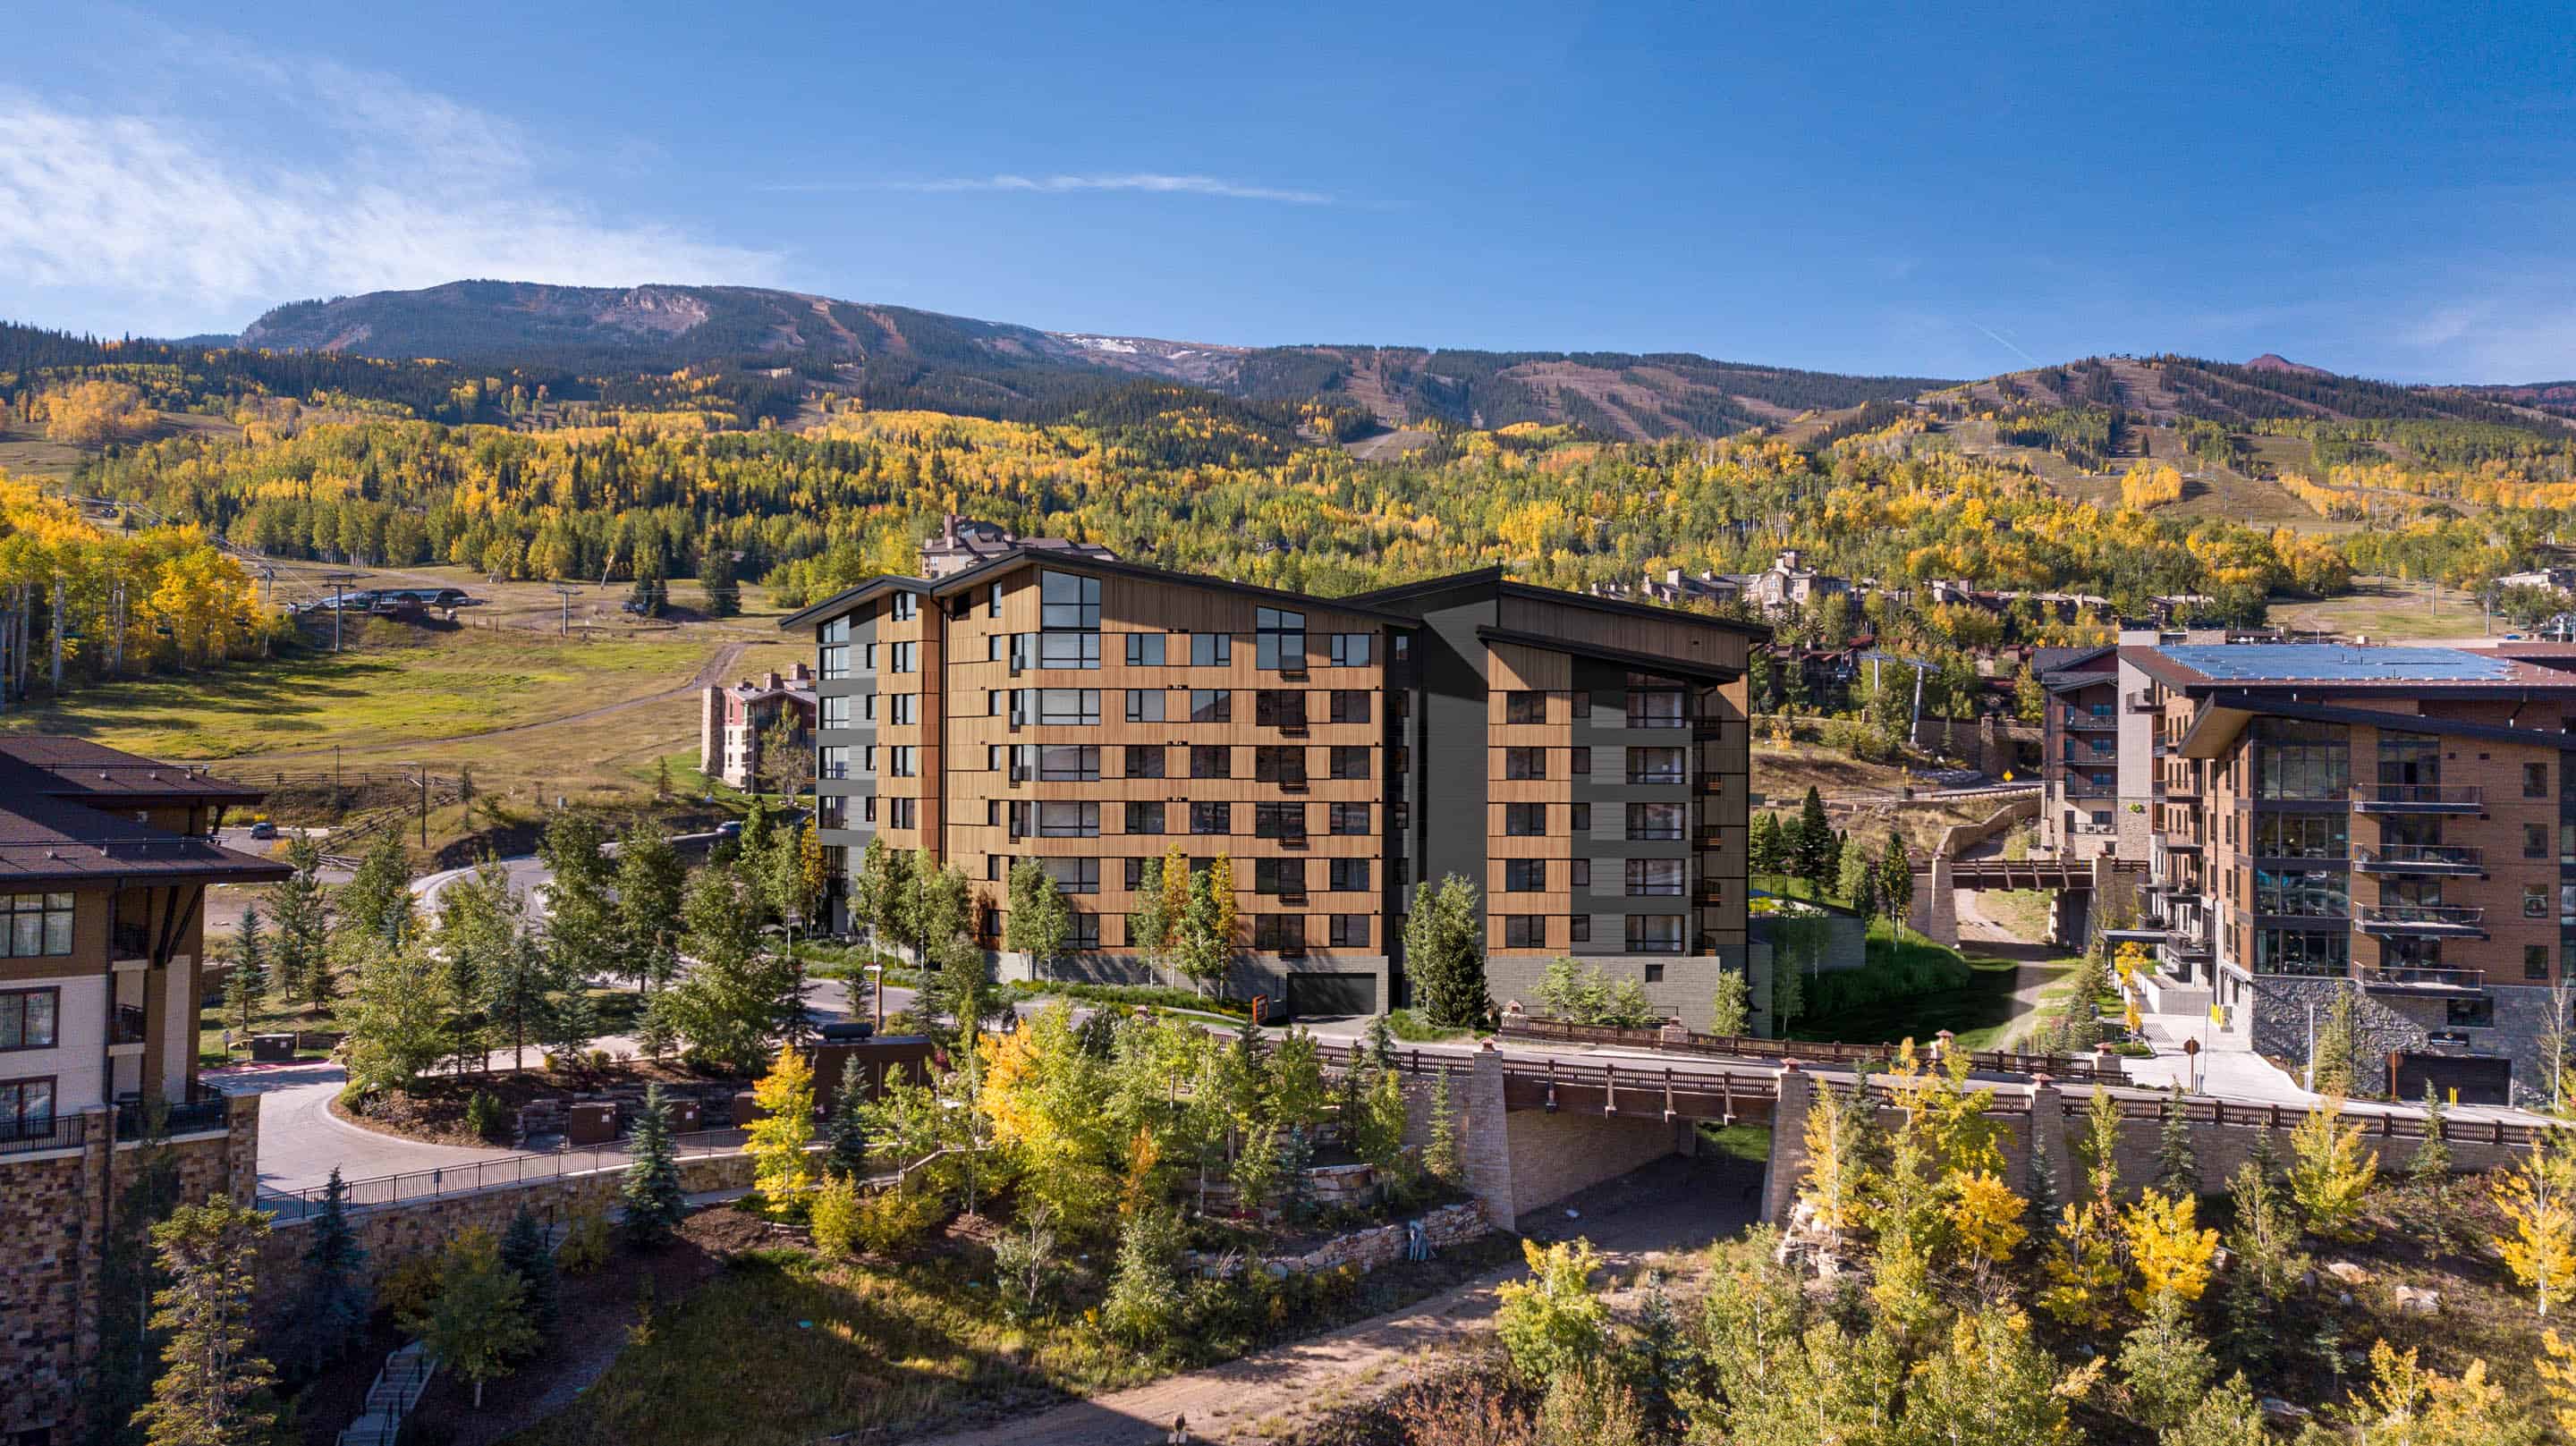 Electric Pass Lodge by Snowmass Mountain Lodging